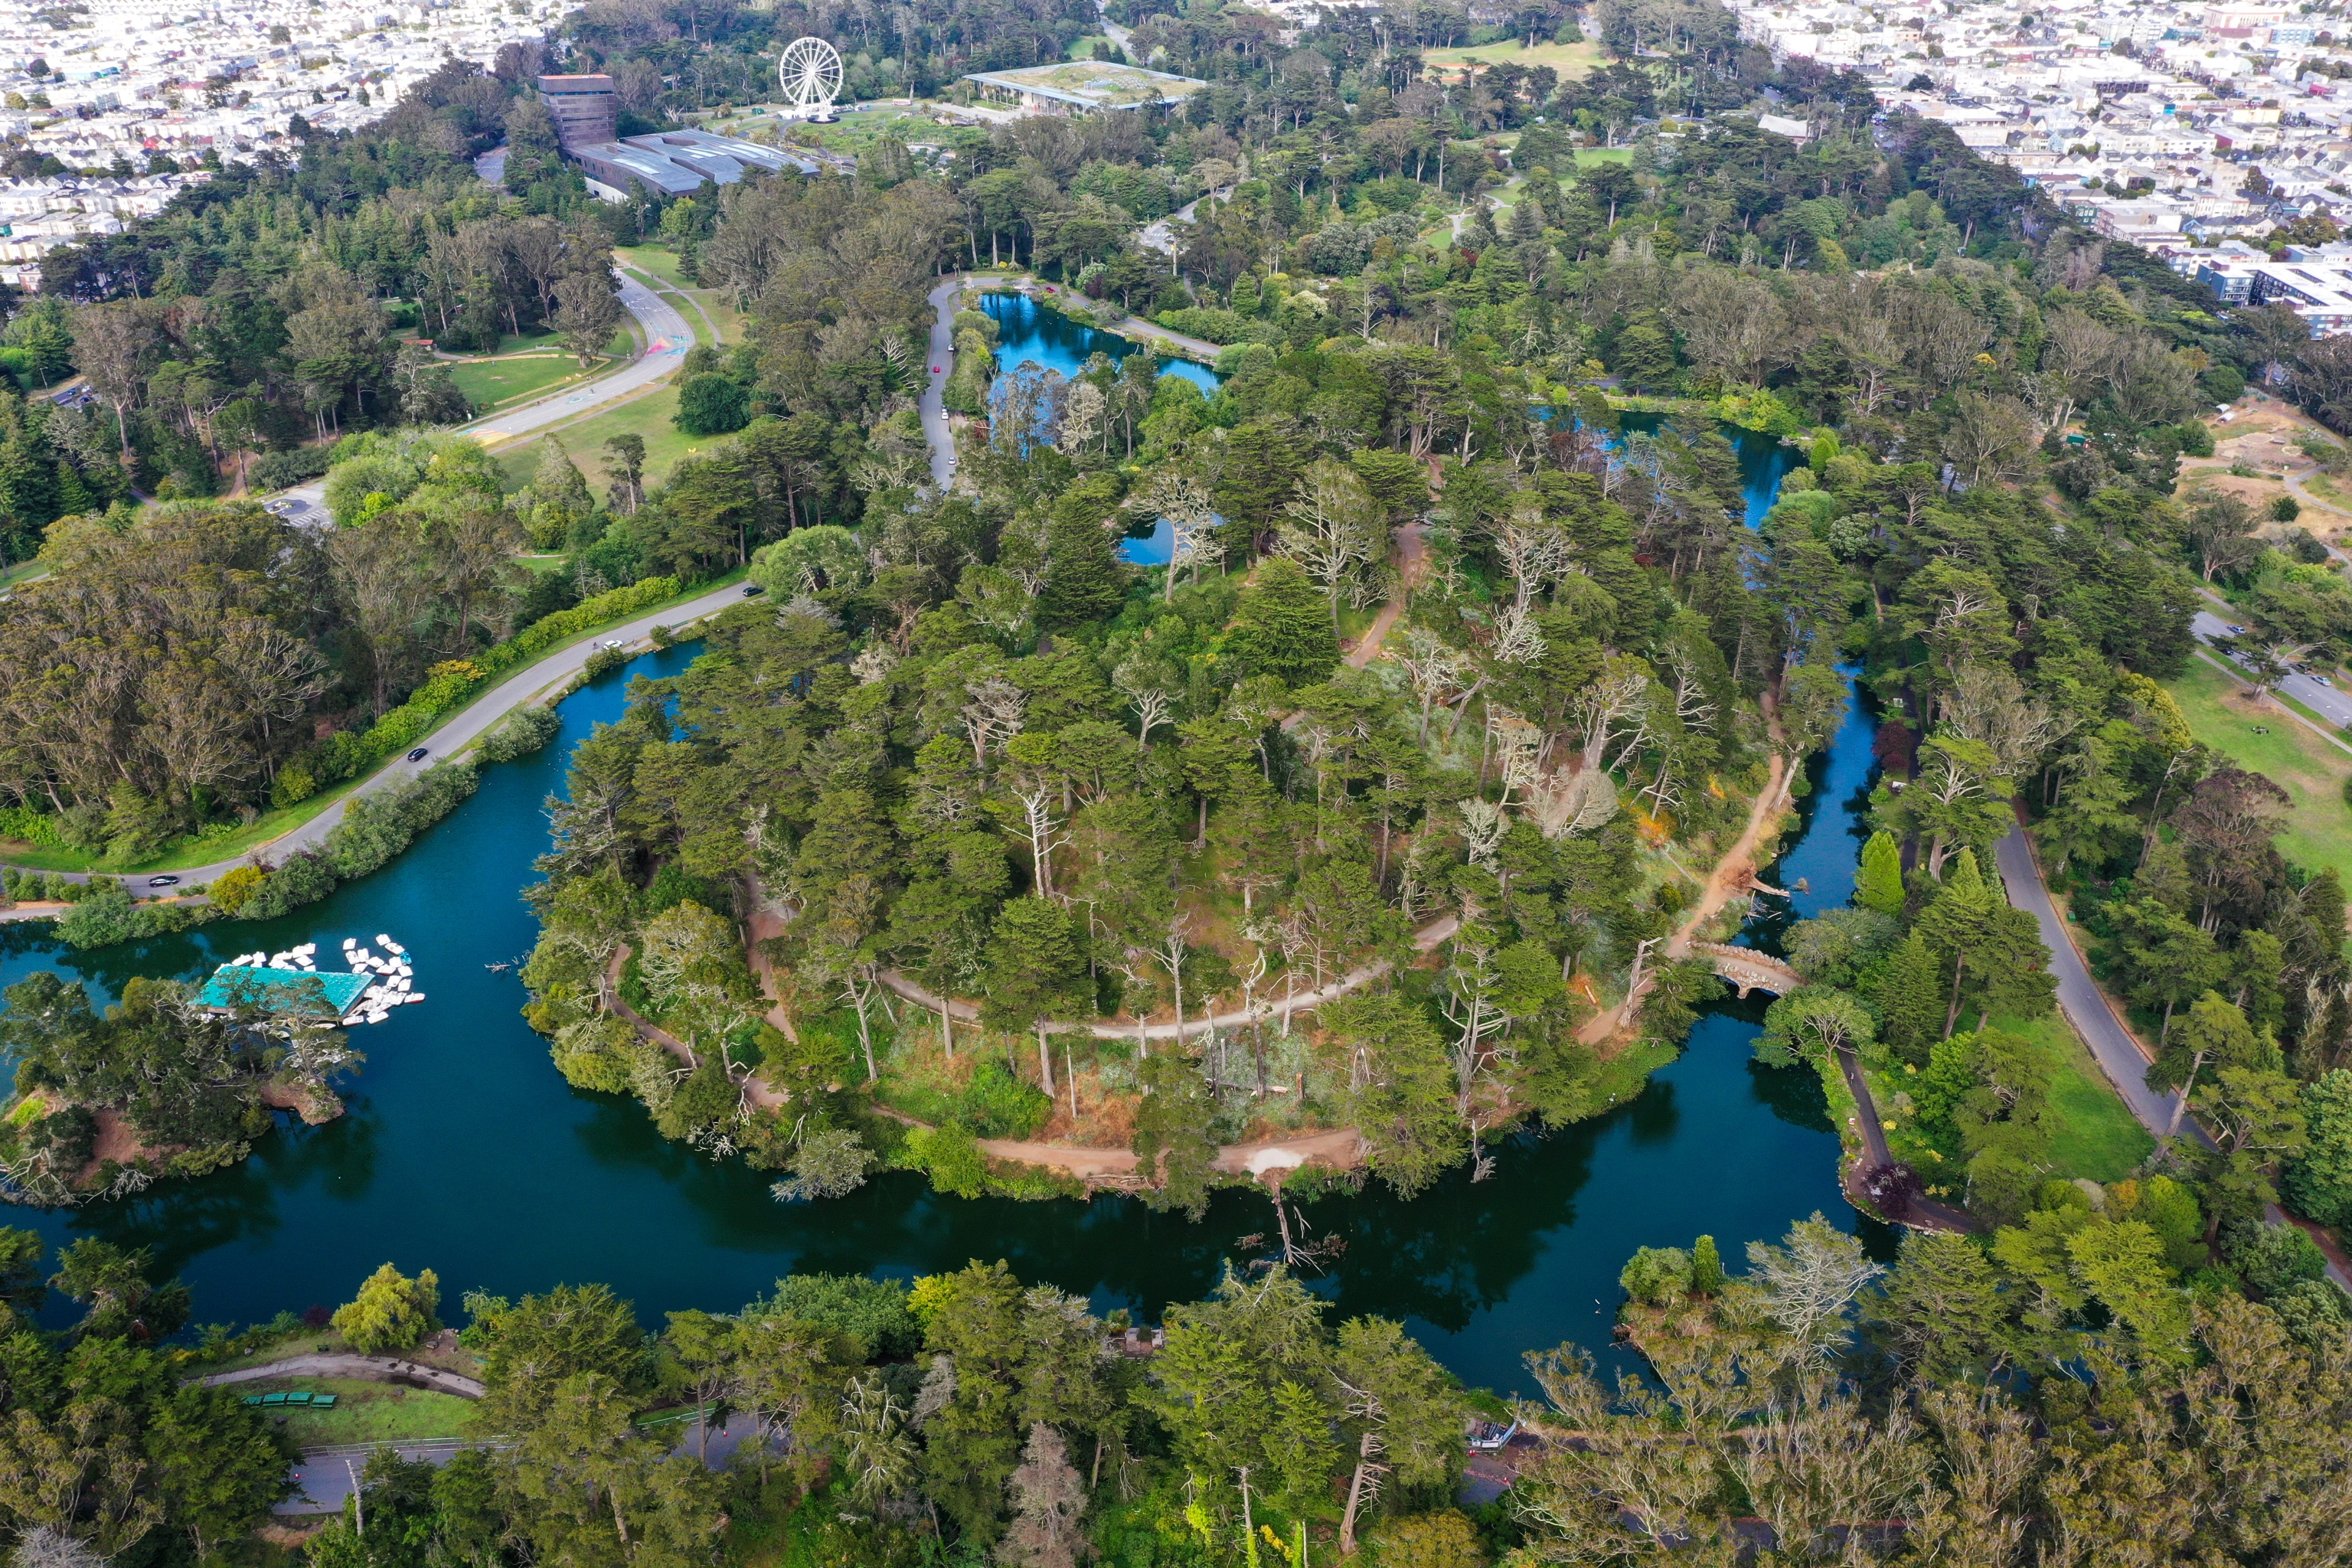 An aerial view of Stow Lake in Golden Gate Park.